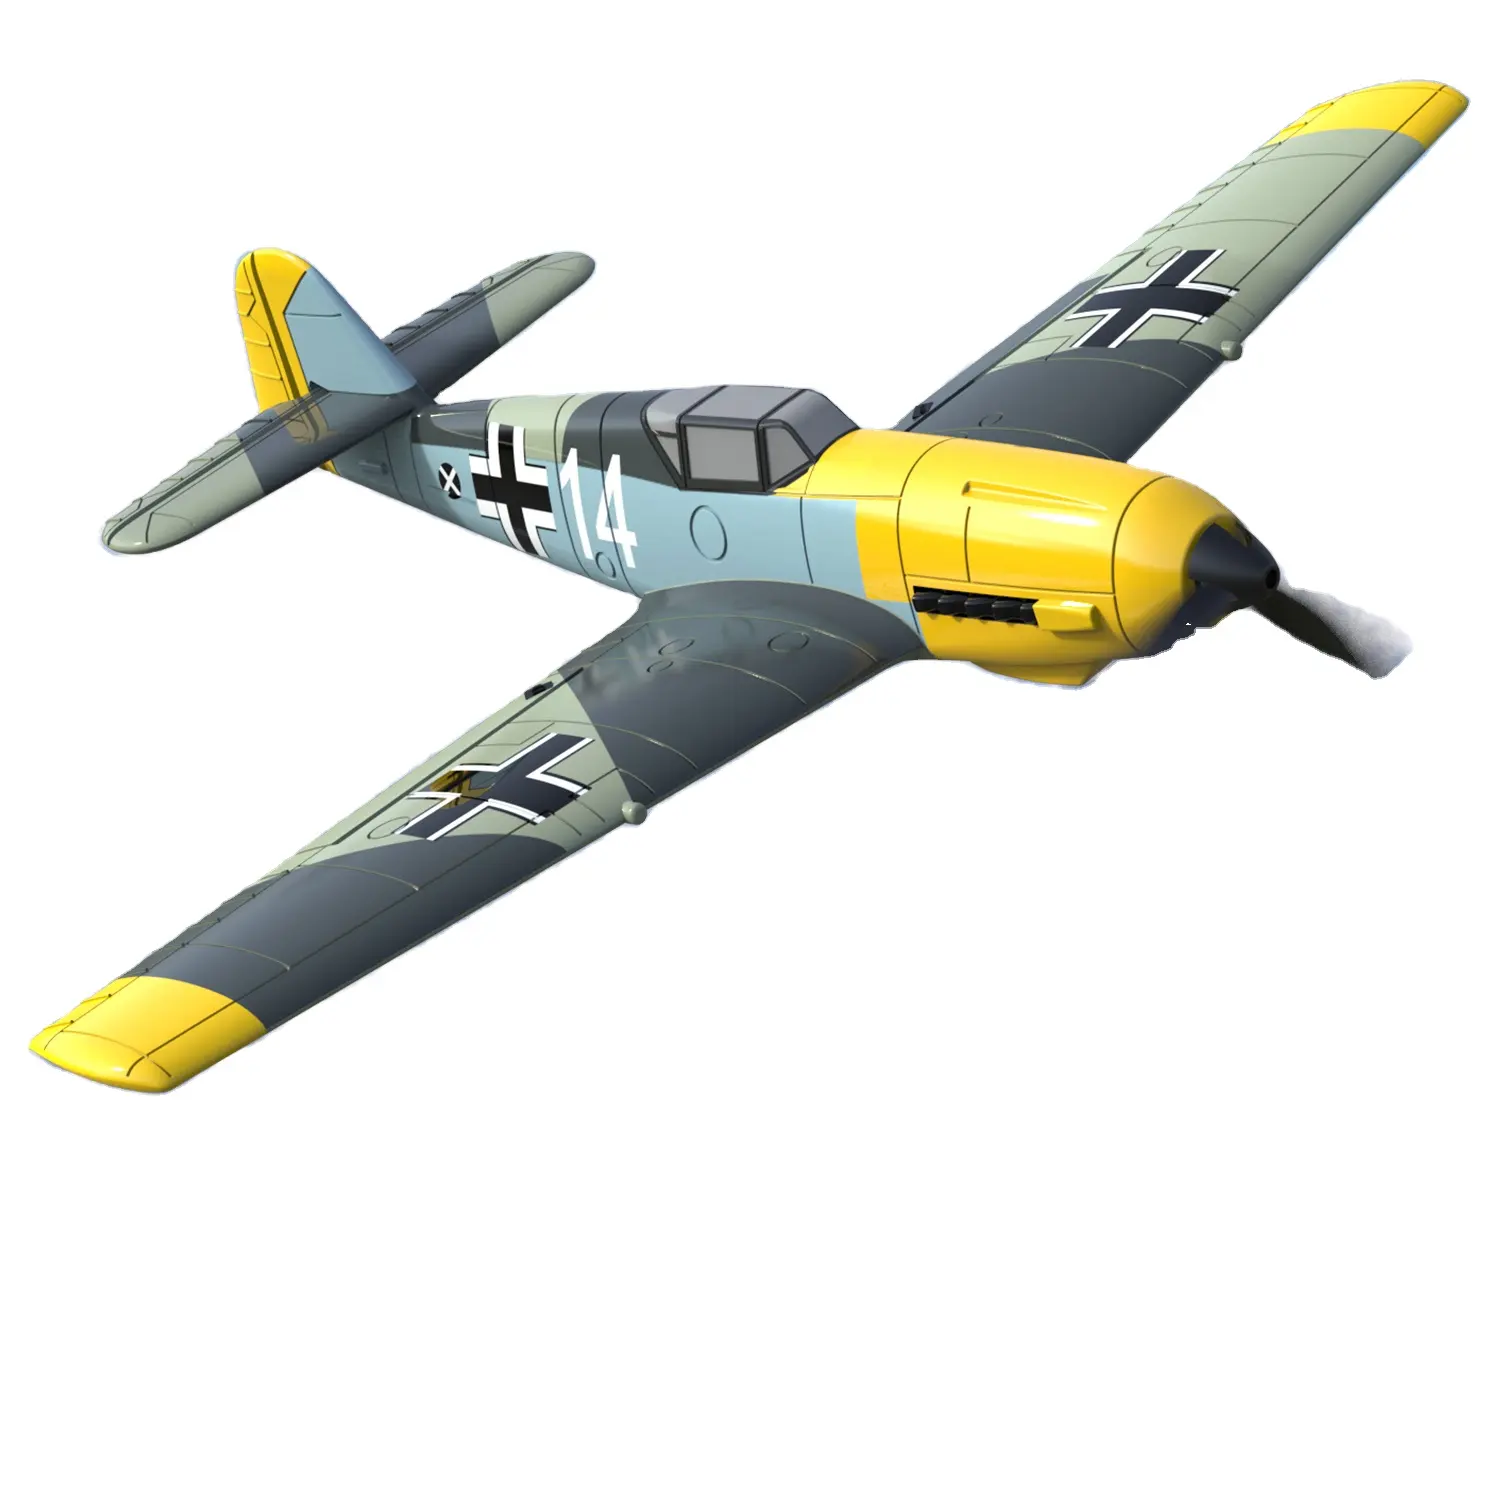 EPP Aerobatic Flight RC Model Remote Control Airplane 2.4GHz Outdoor Toys For Kids Children Outdoor game